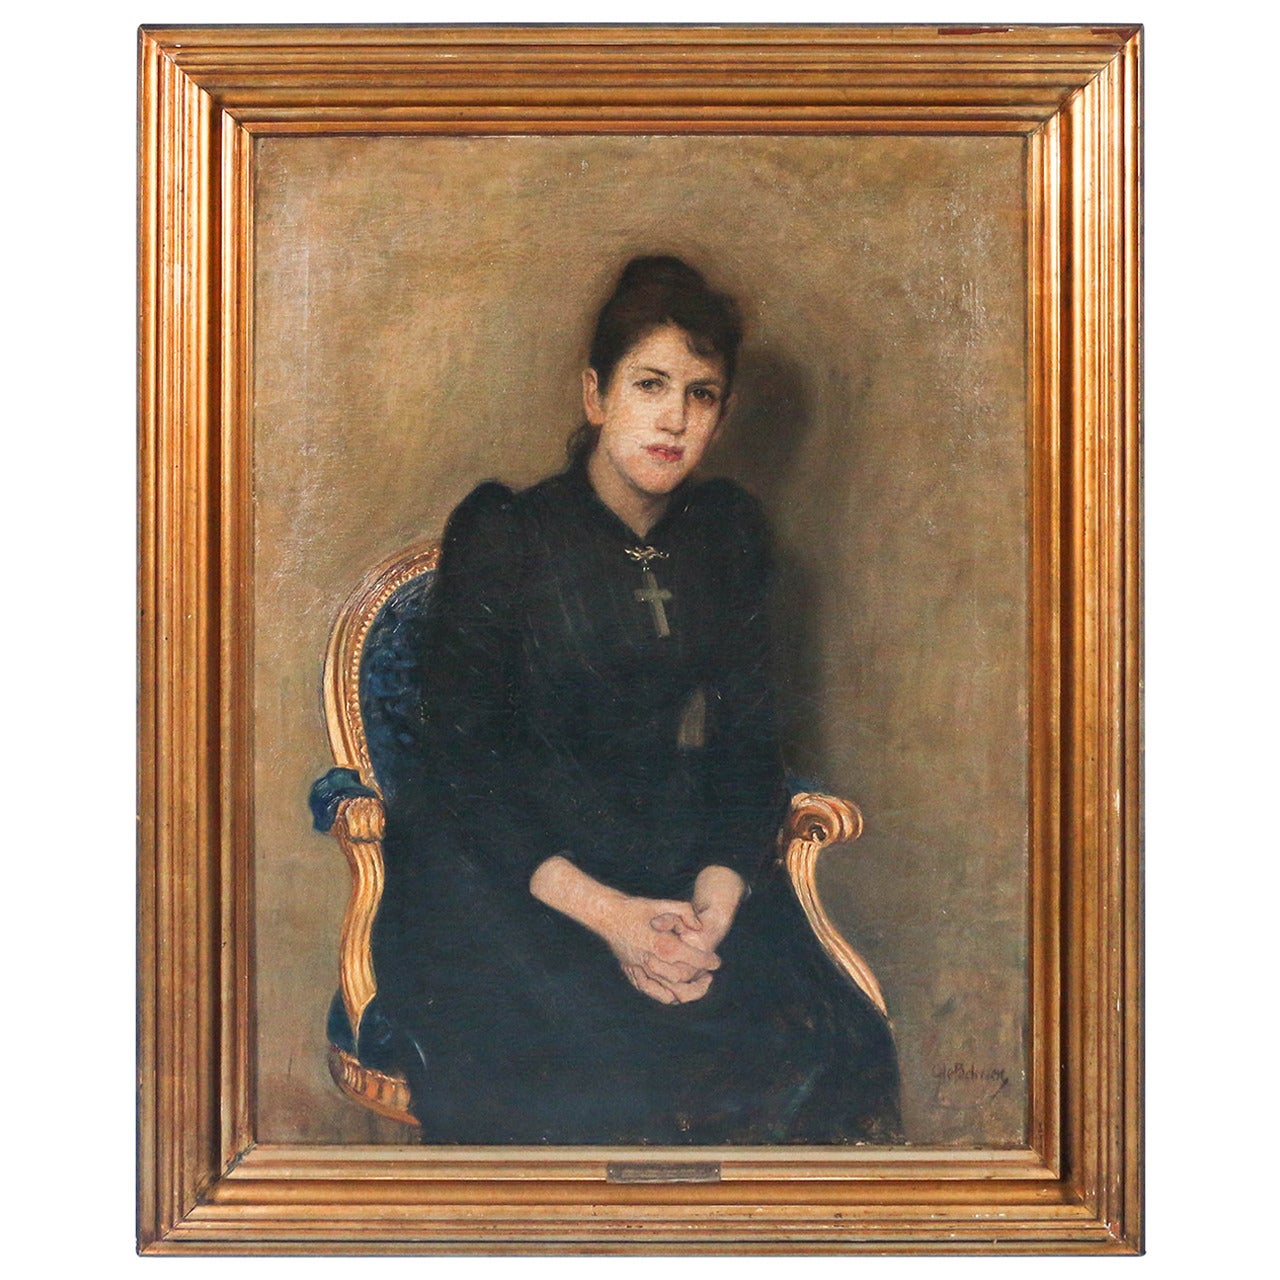 Antique Original Oil on Canvas, "Portrait of My Wife, " by Ole Petersen